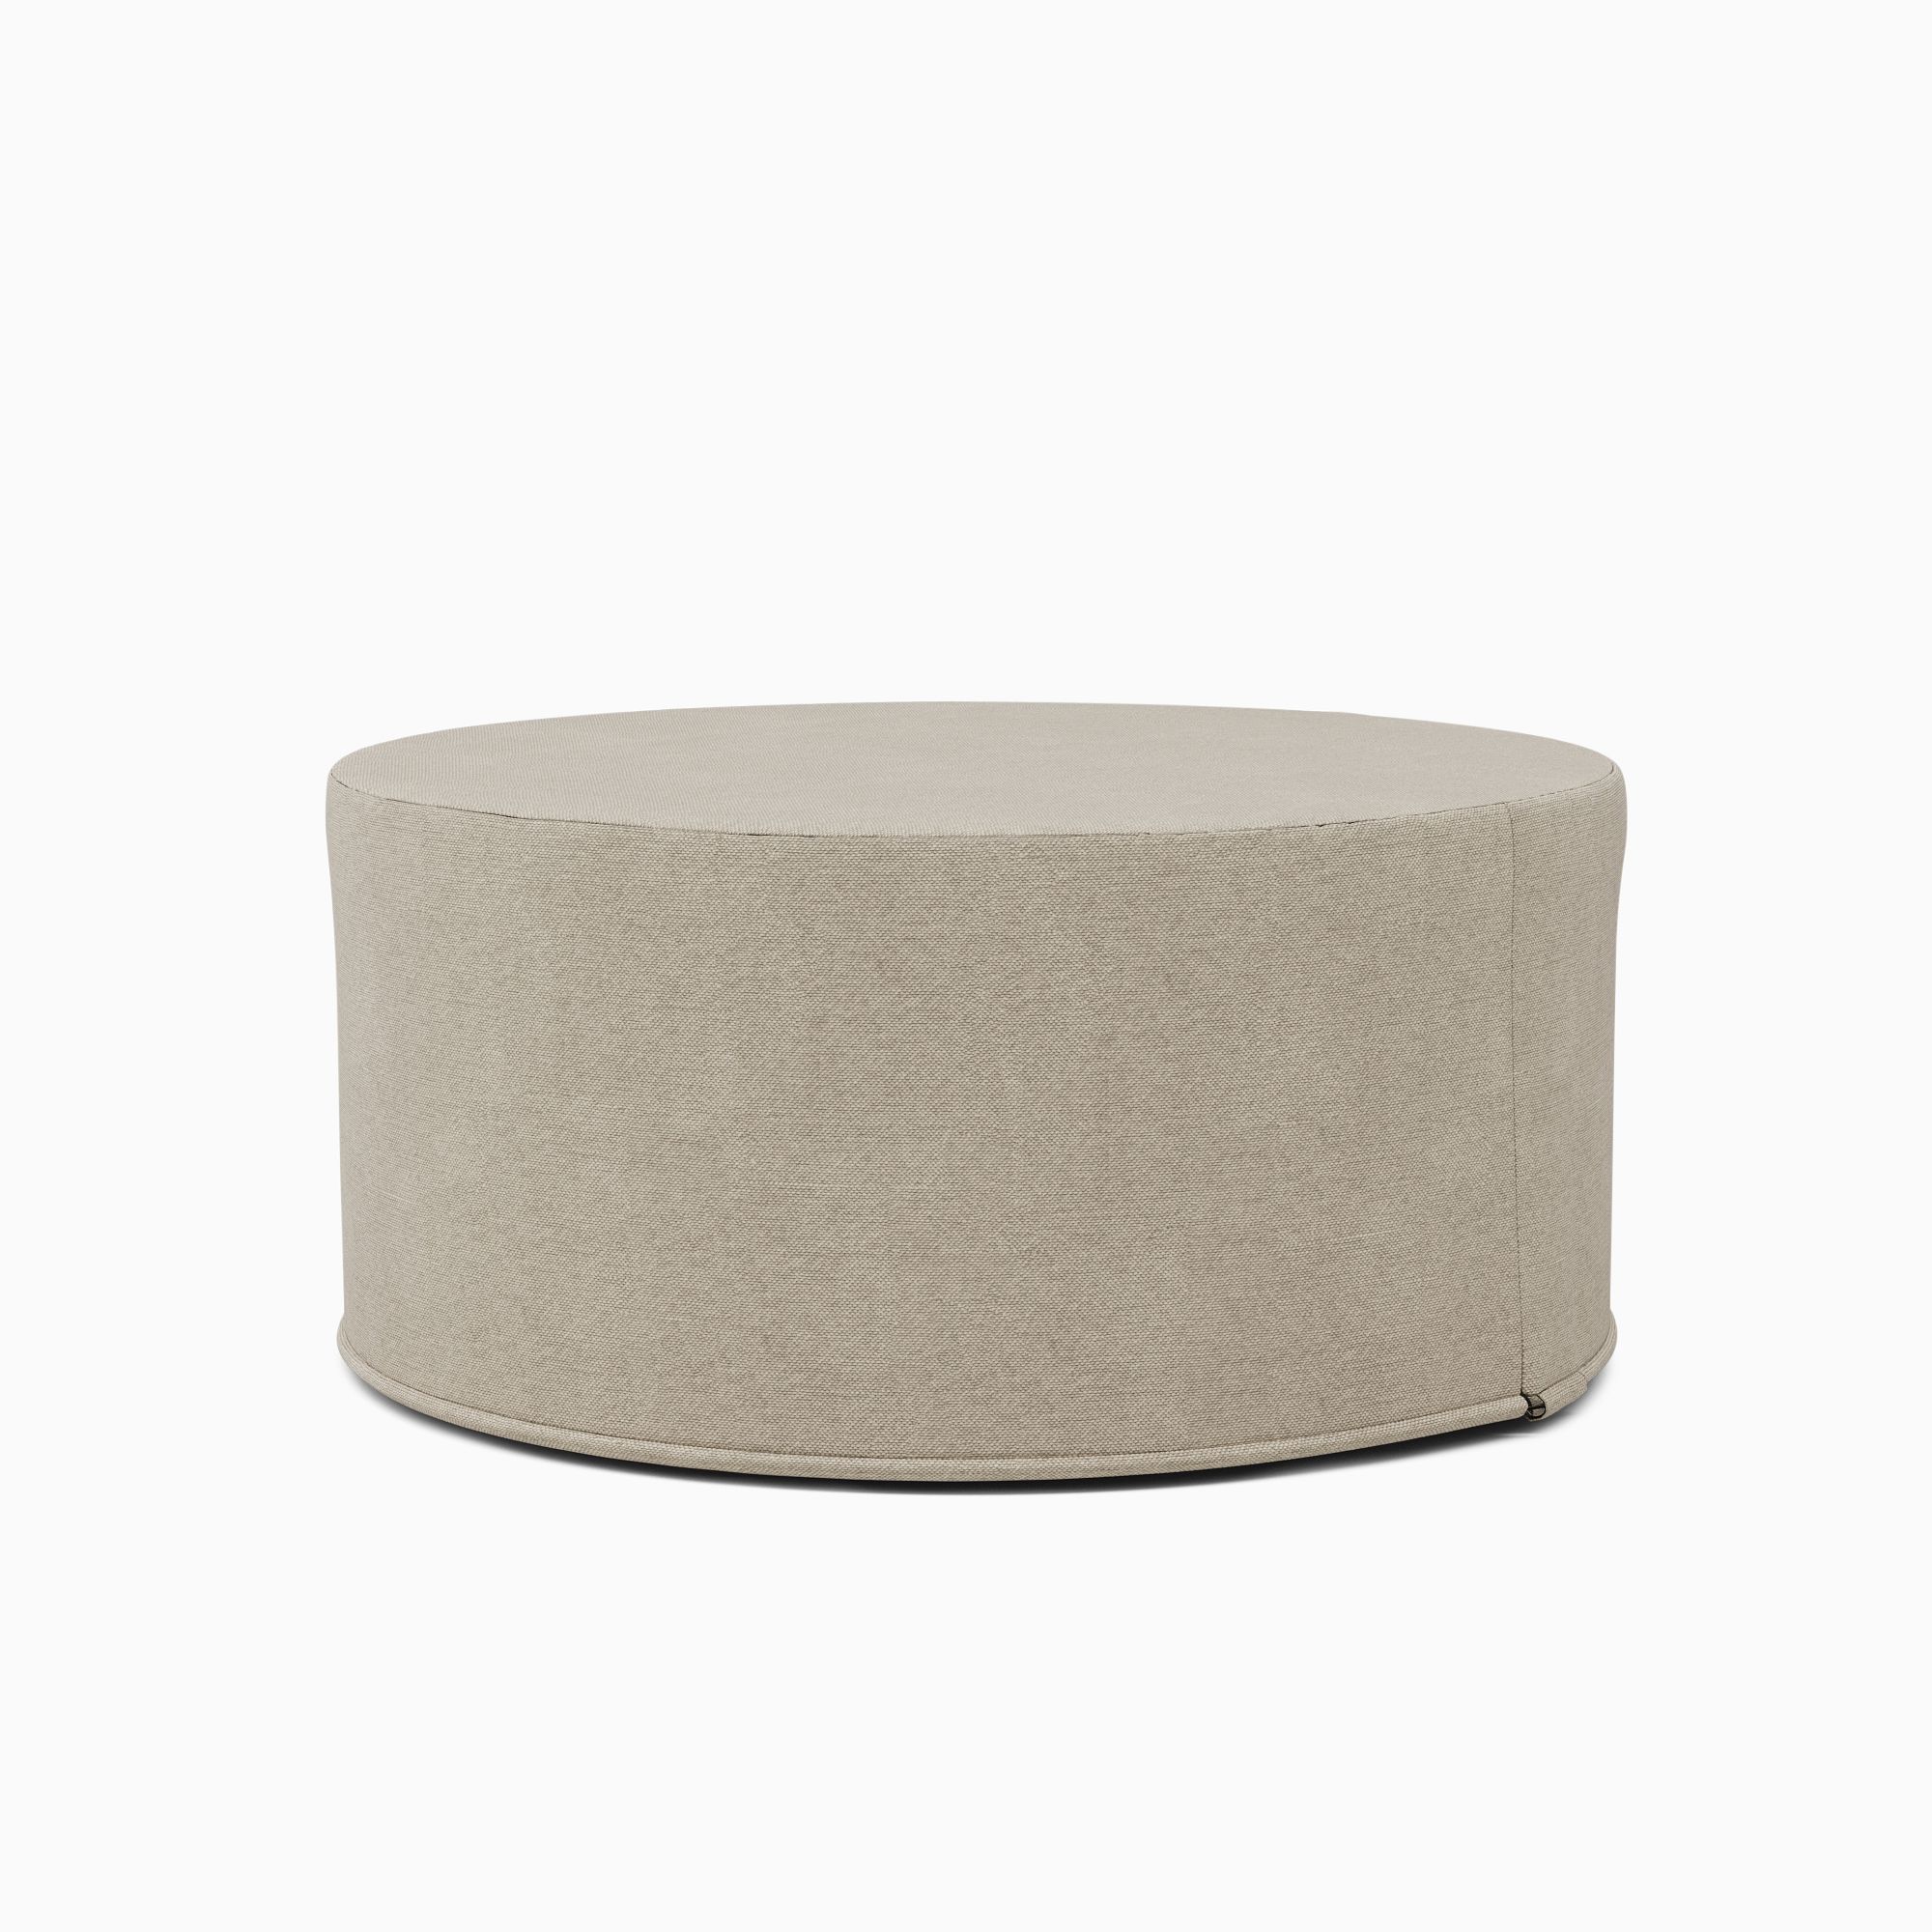 Mancora Outdoor Coffee Table Protective Cover | West Elm